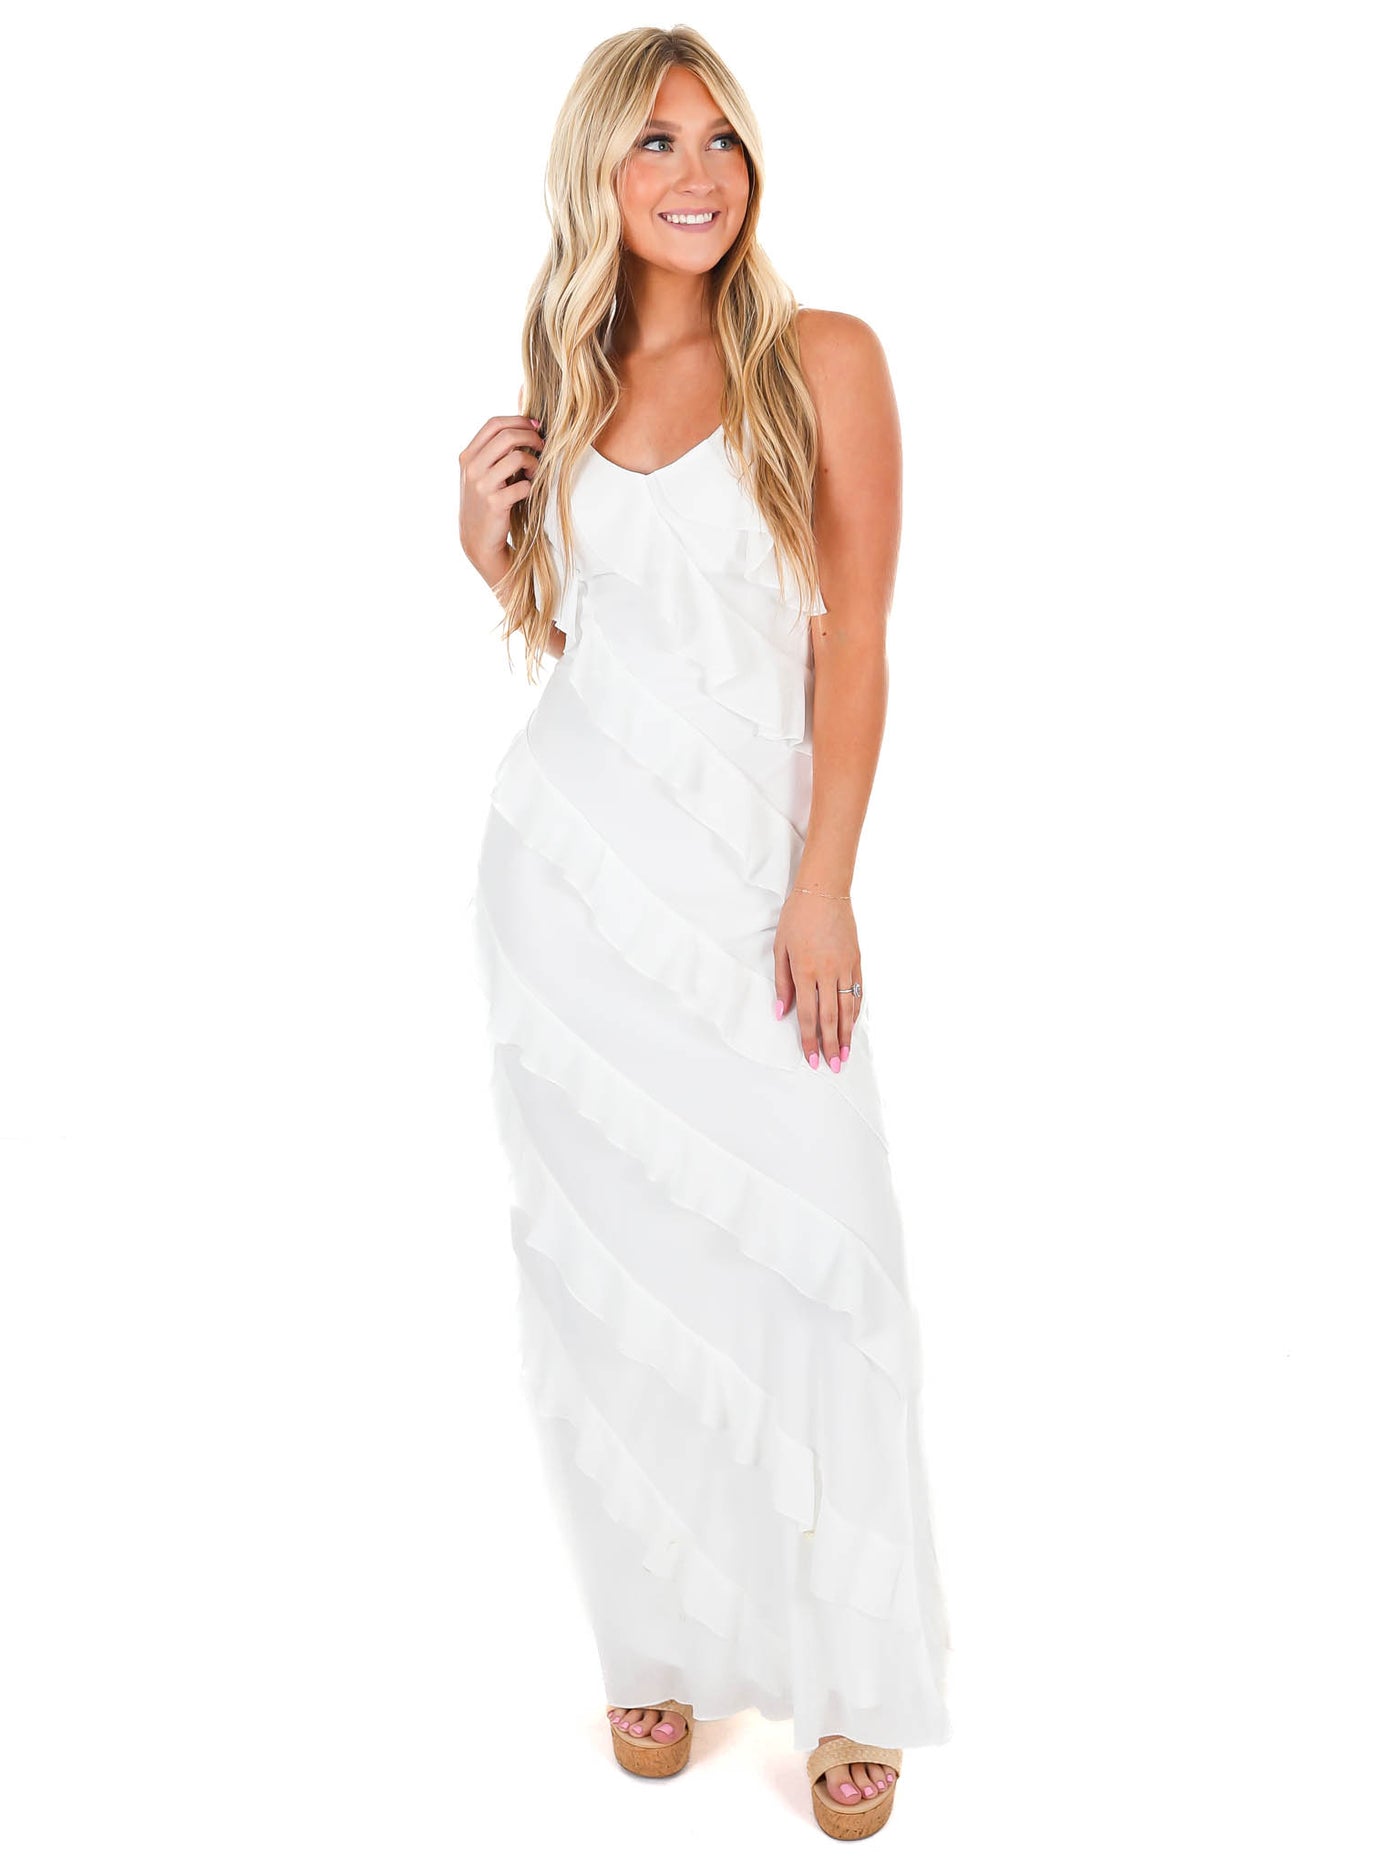 Signed Sealed Delivered Ruffle Maxi Dress